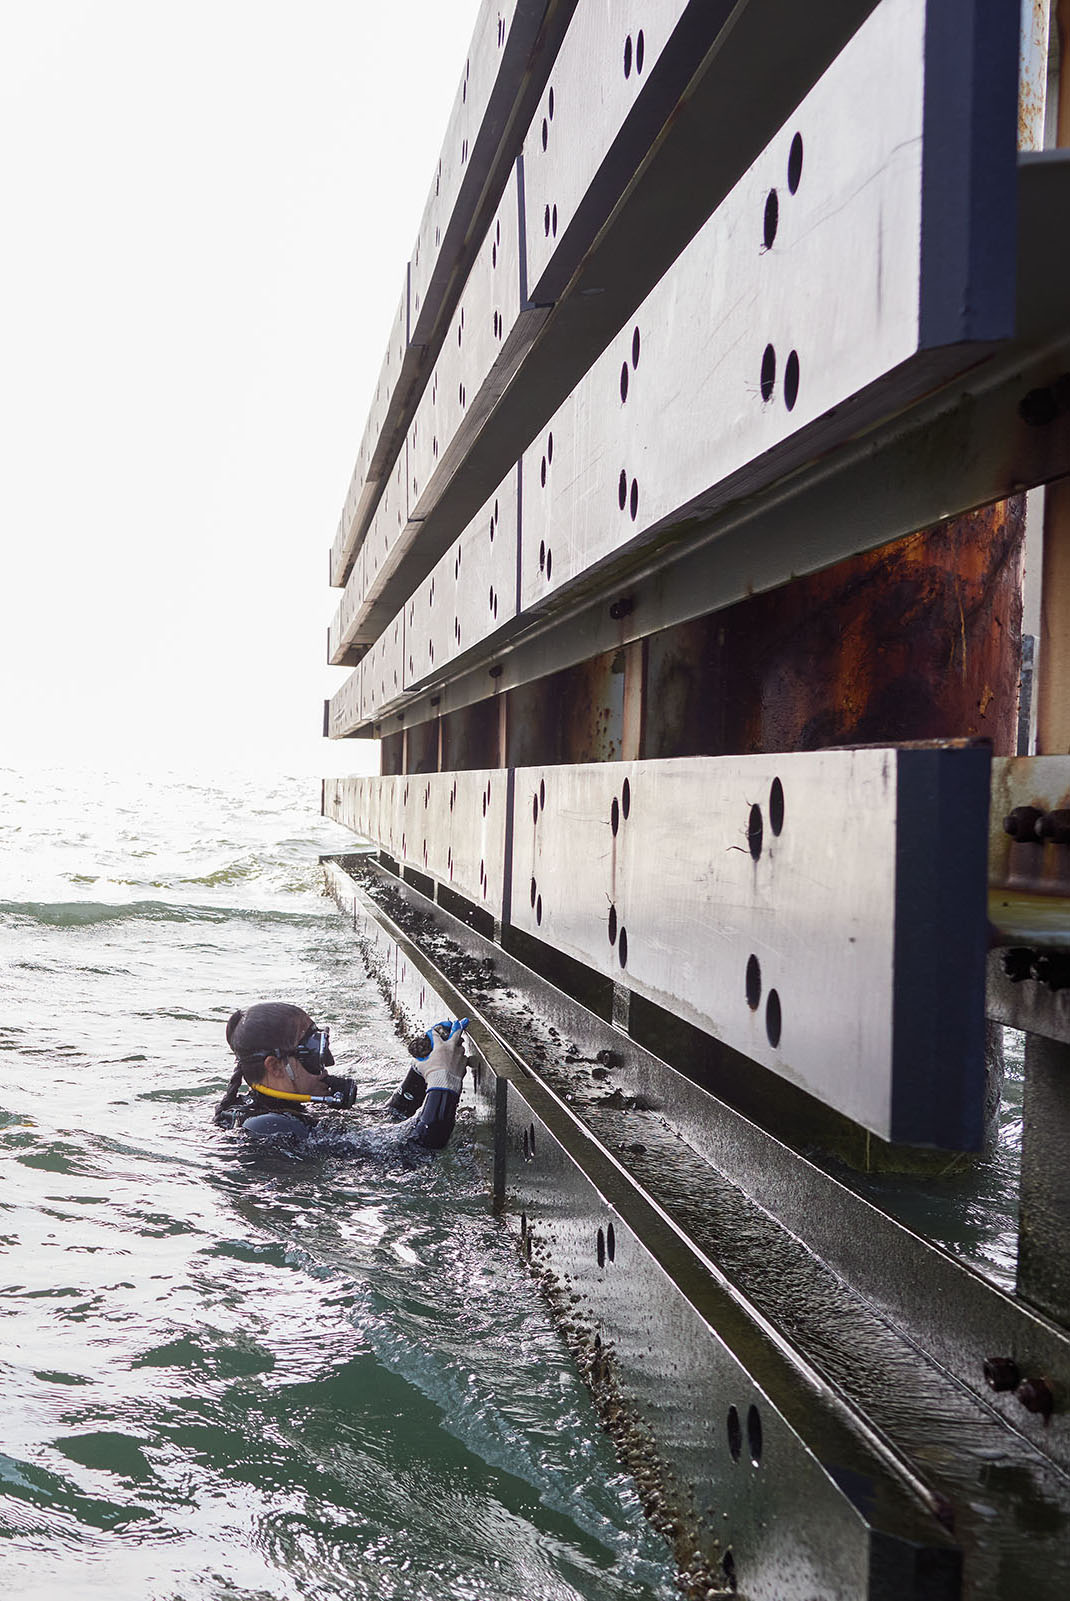 A person in SCUBA gear hangs off the side of a large structure in wavy water